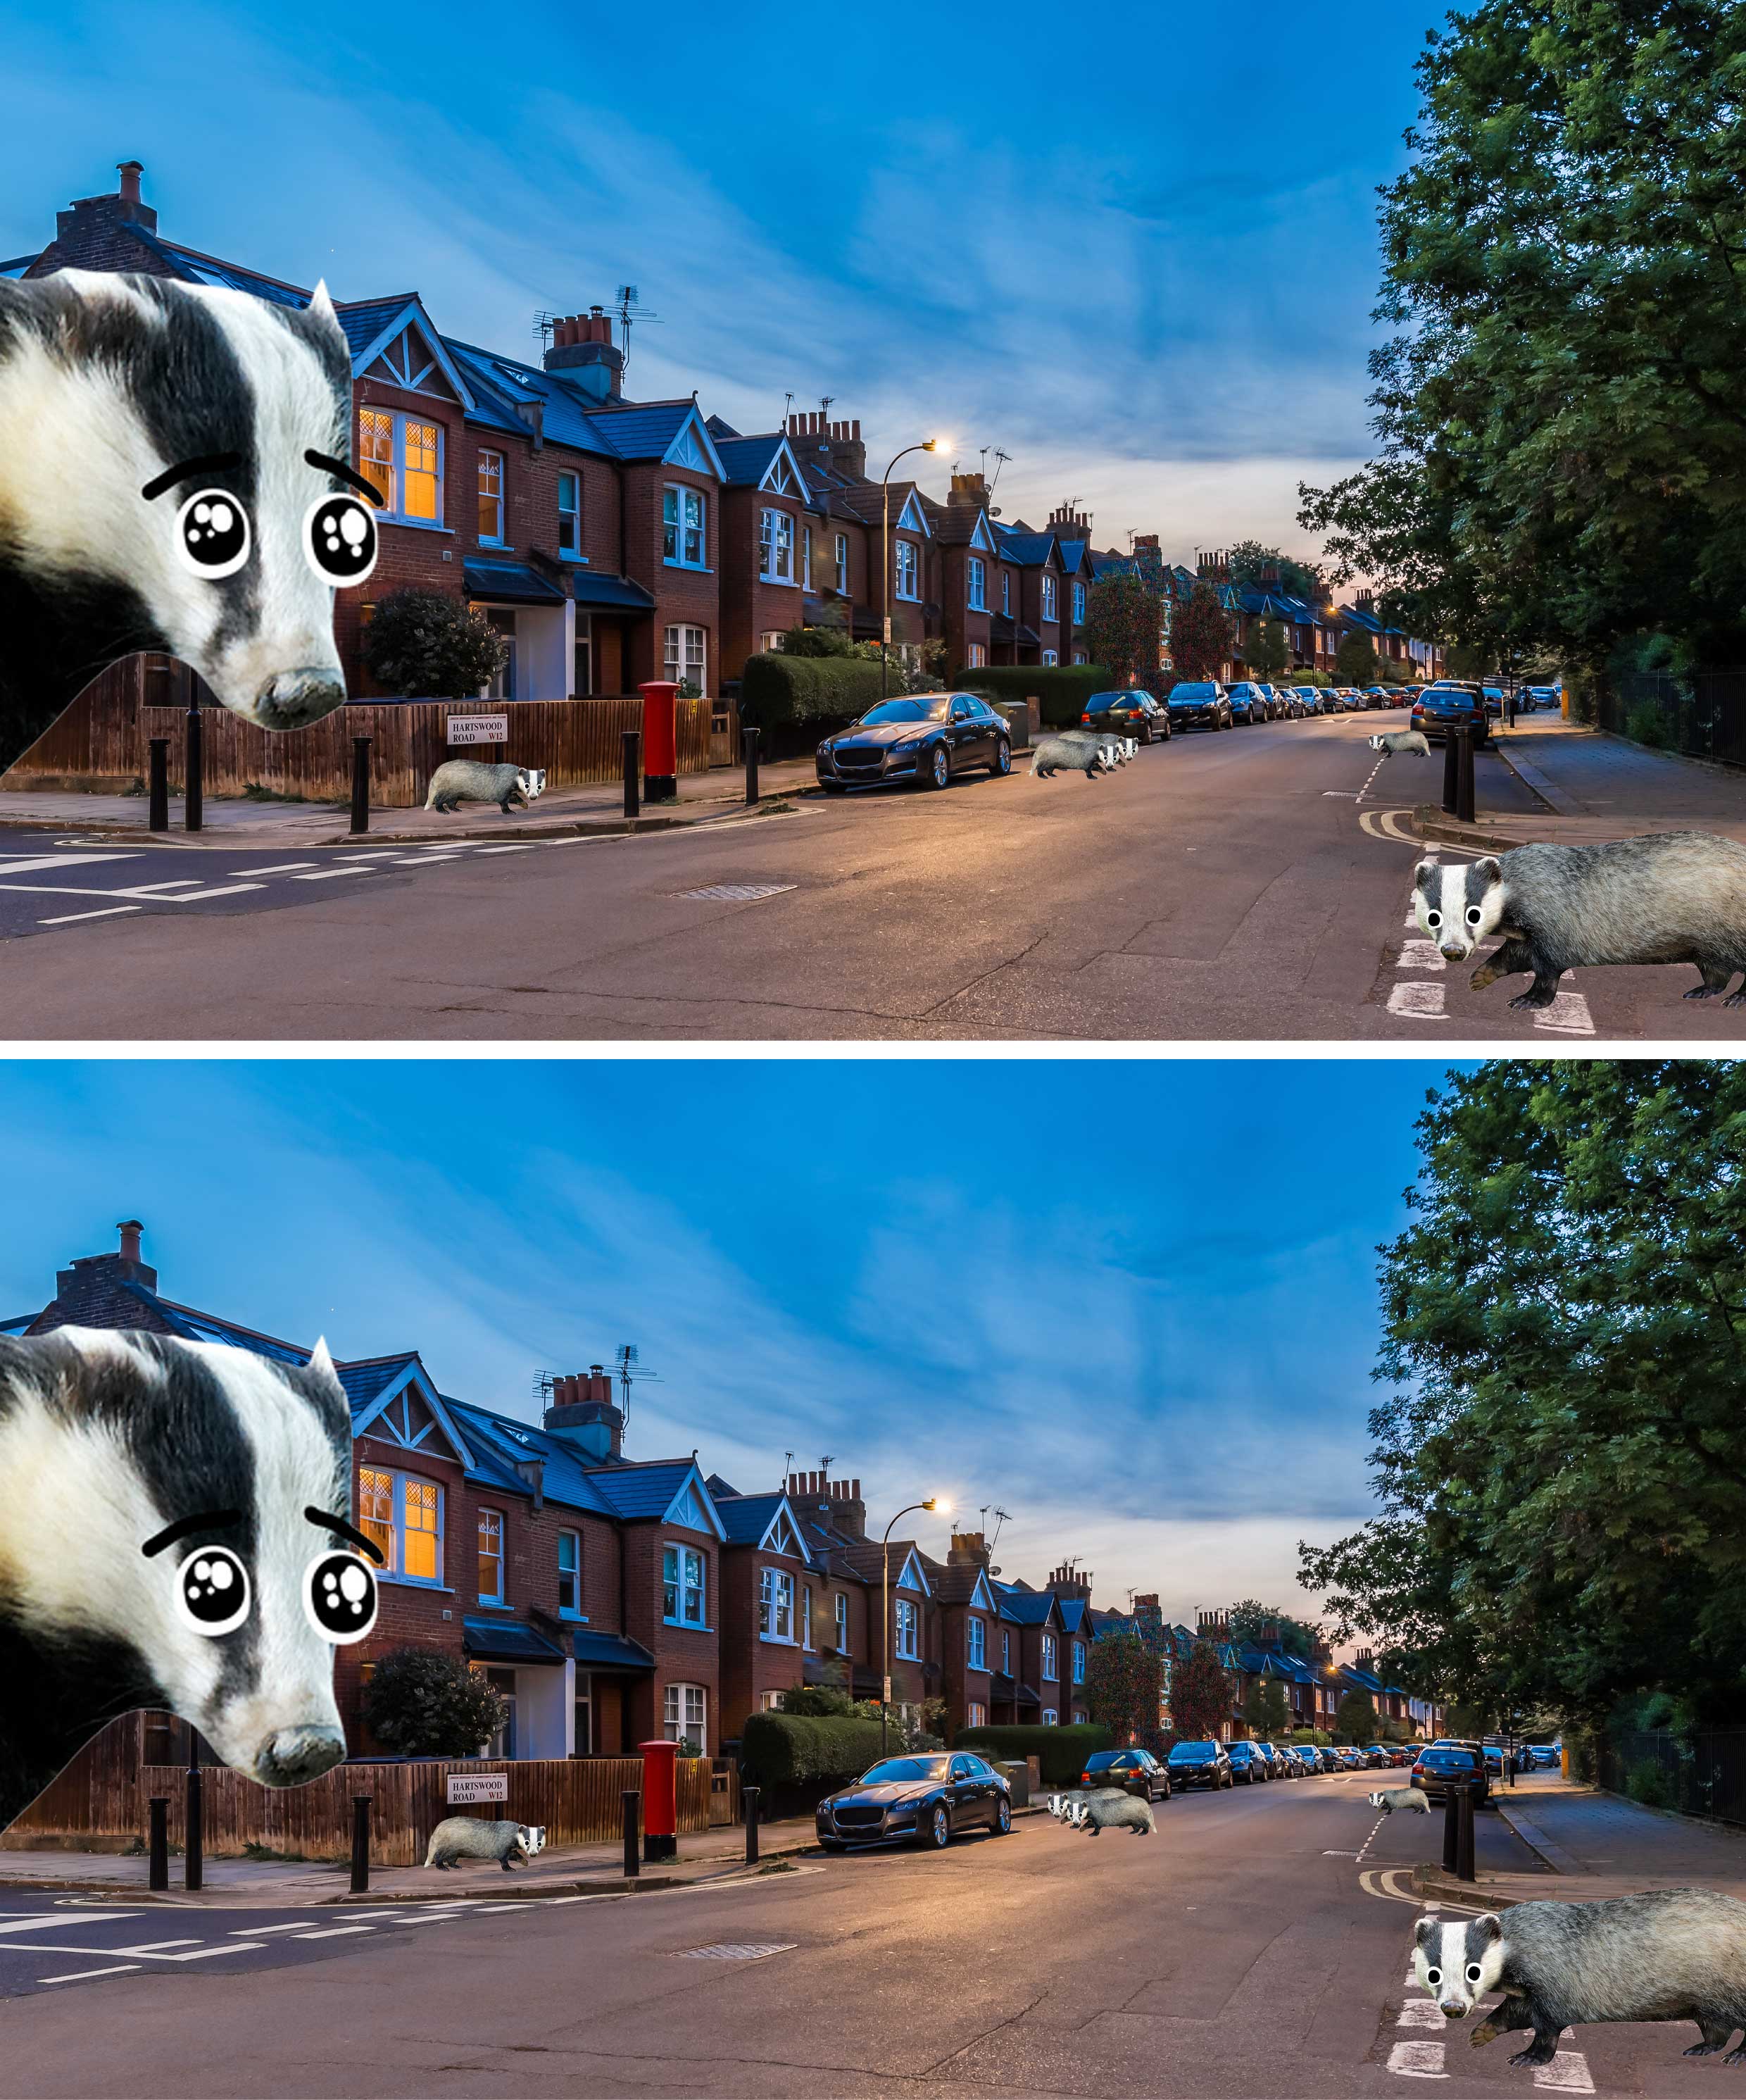 Two similar images of badgers in a quiet London street